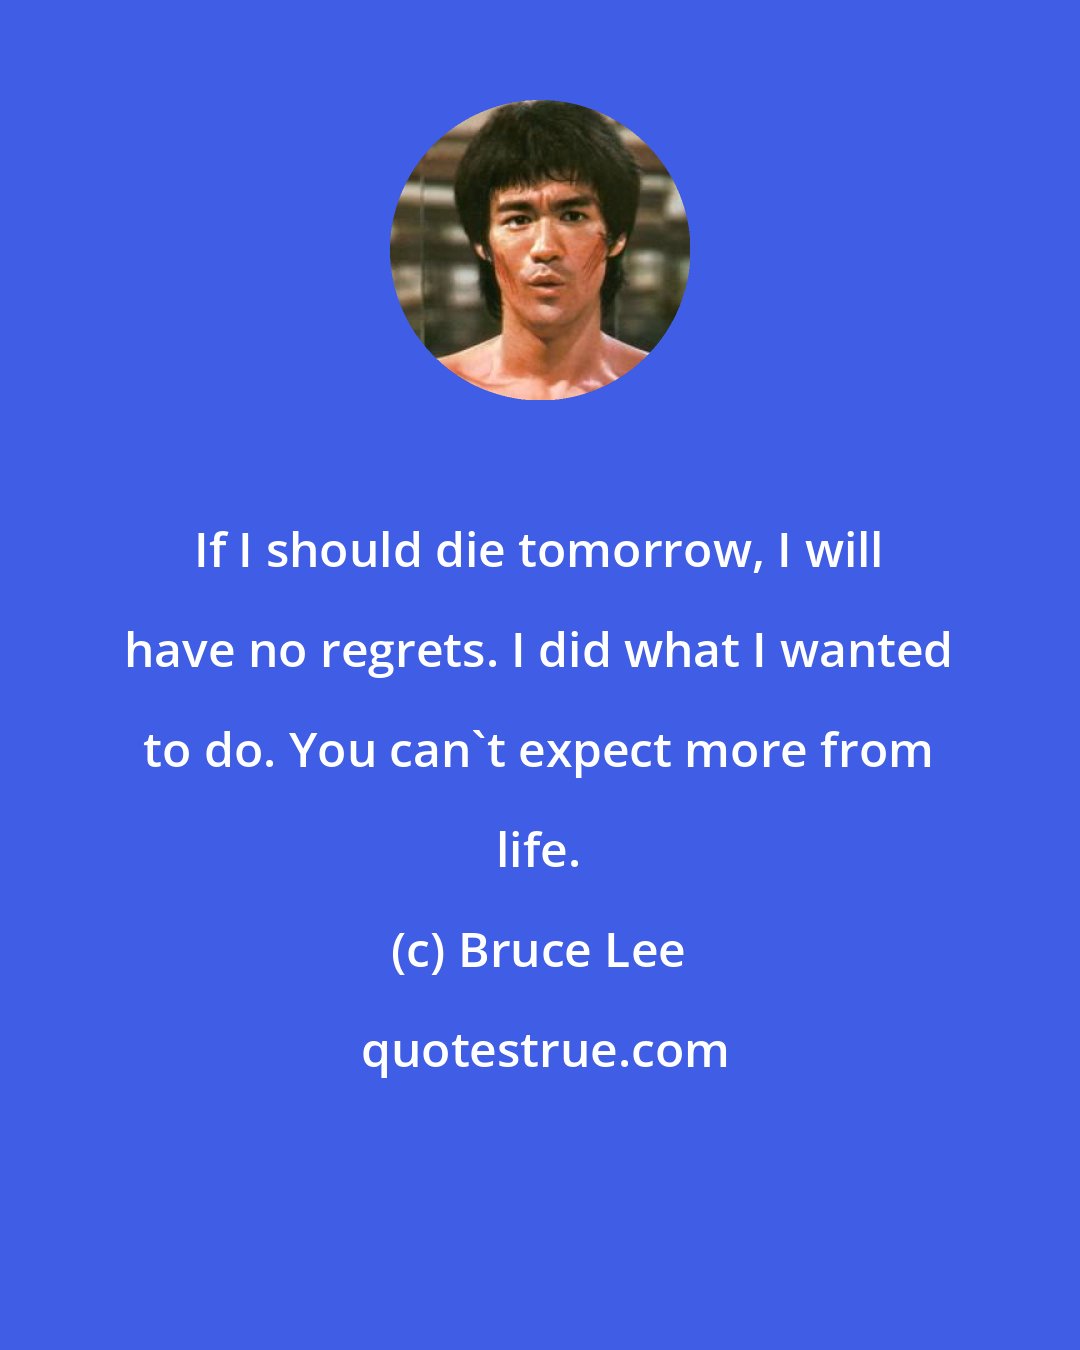 Bruce Lee: If I should die tomorrow, I will have no regrets. I did what I wanted to do. You can't expect more from life.